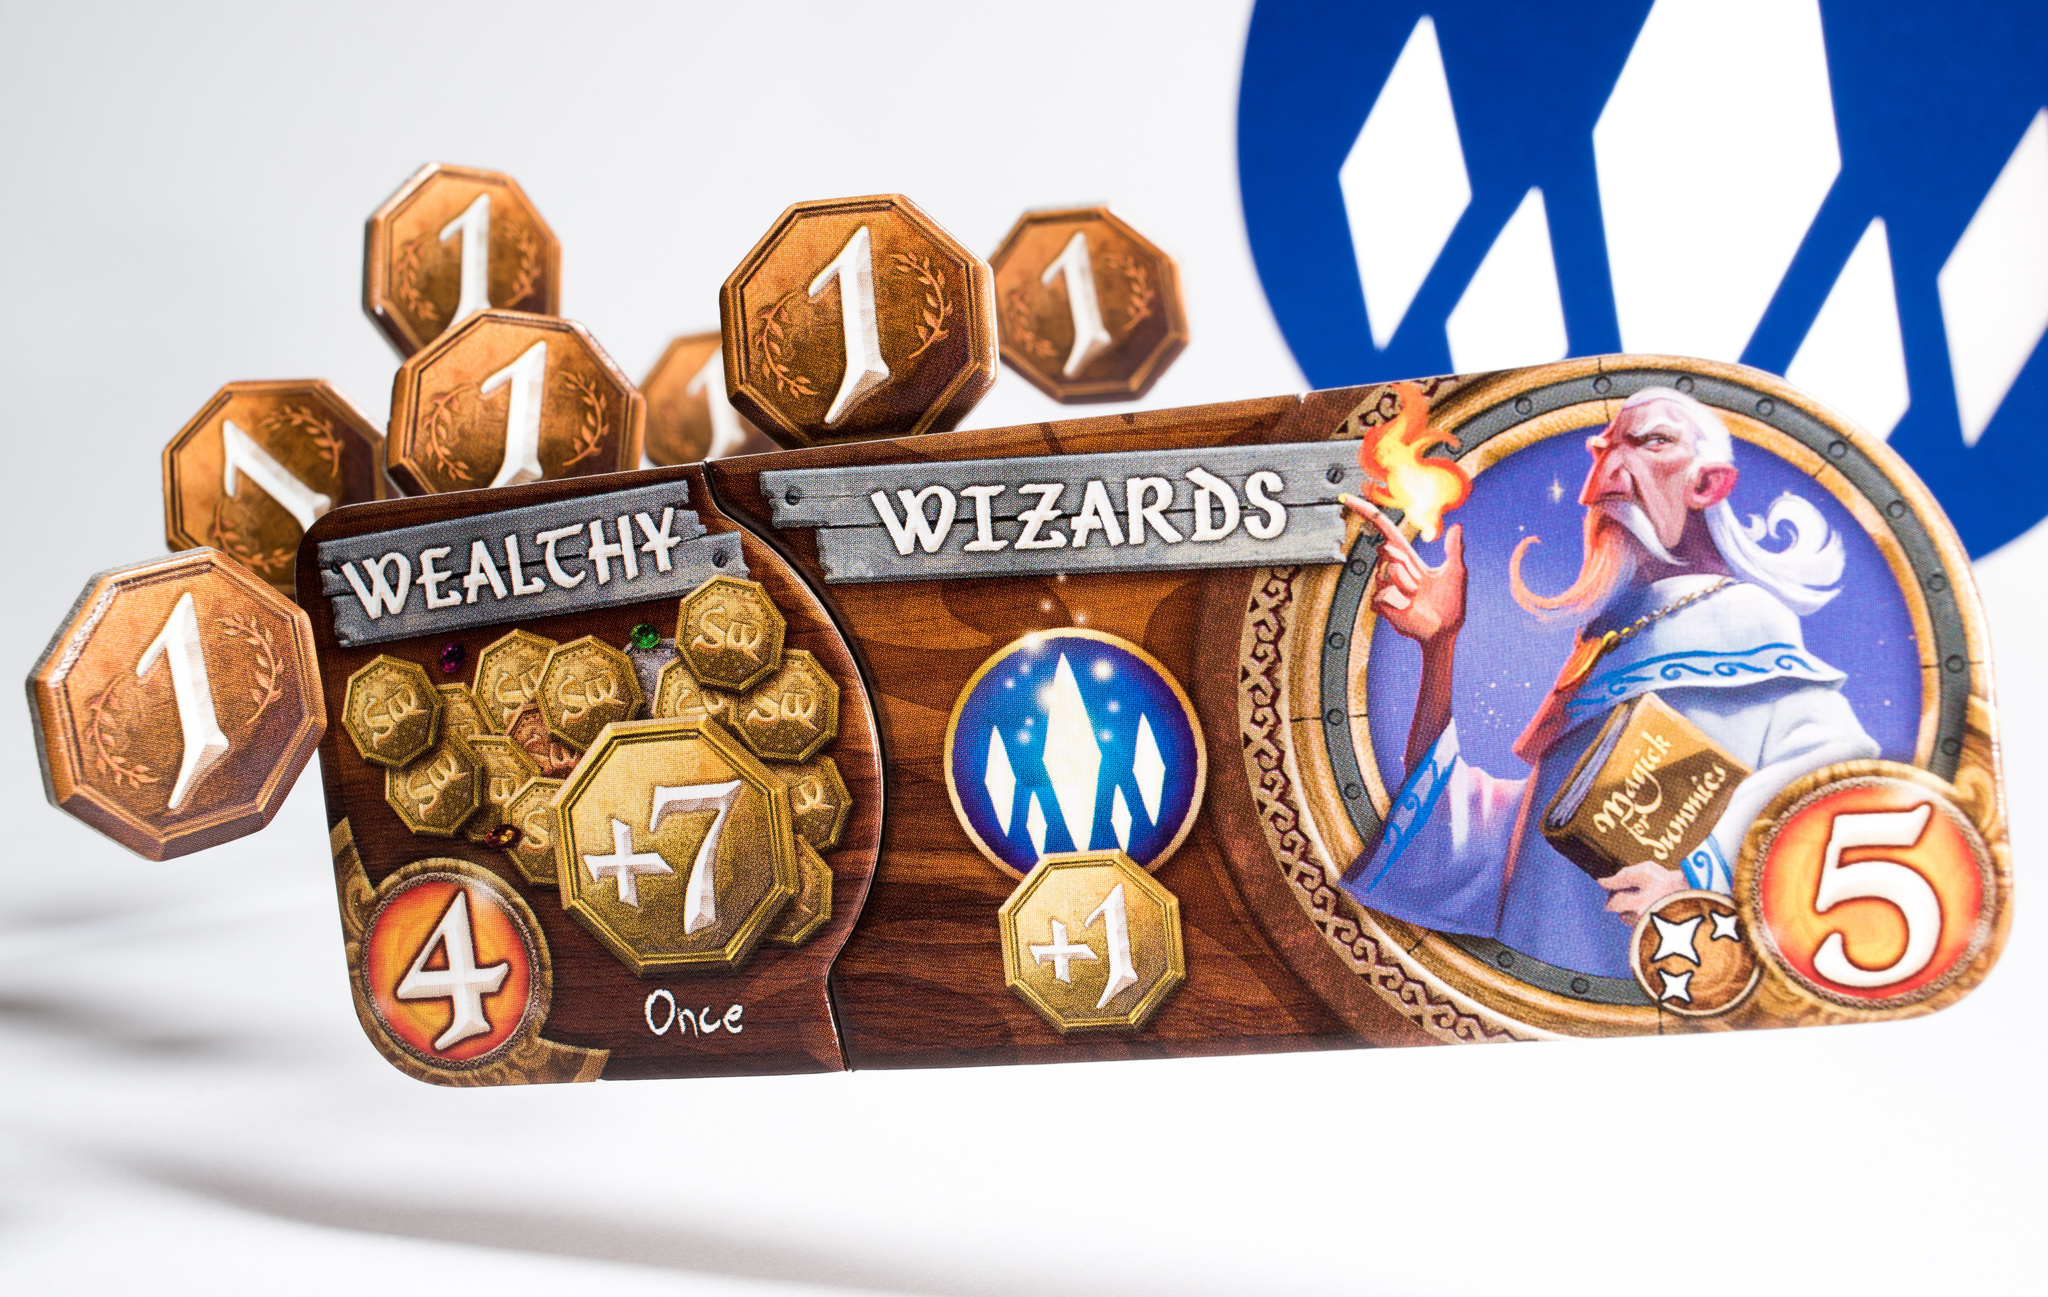 Wealthy Wizard faction from Small World